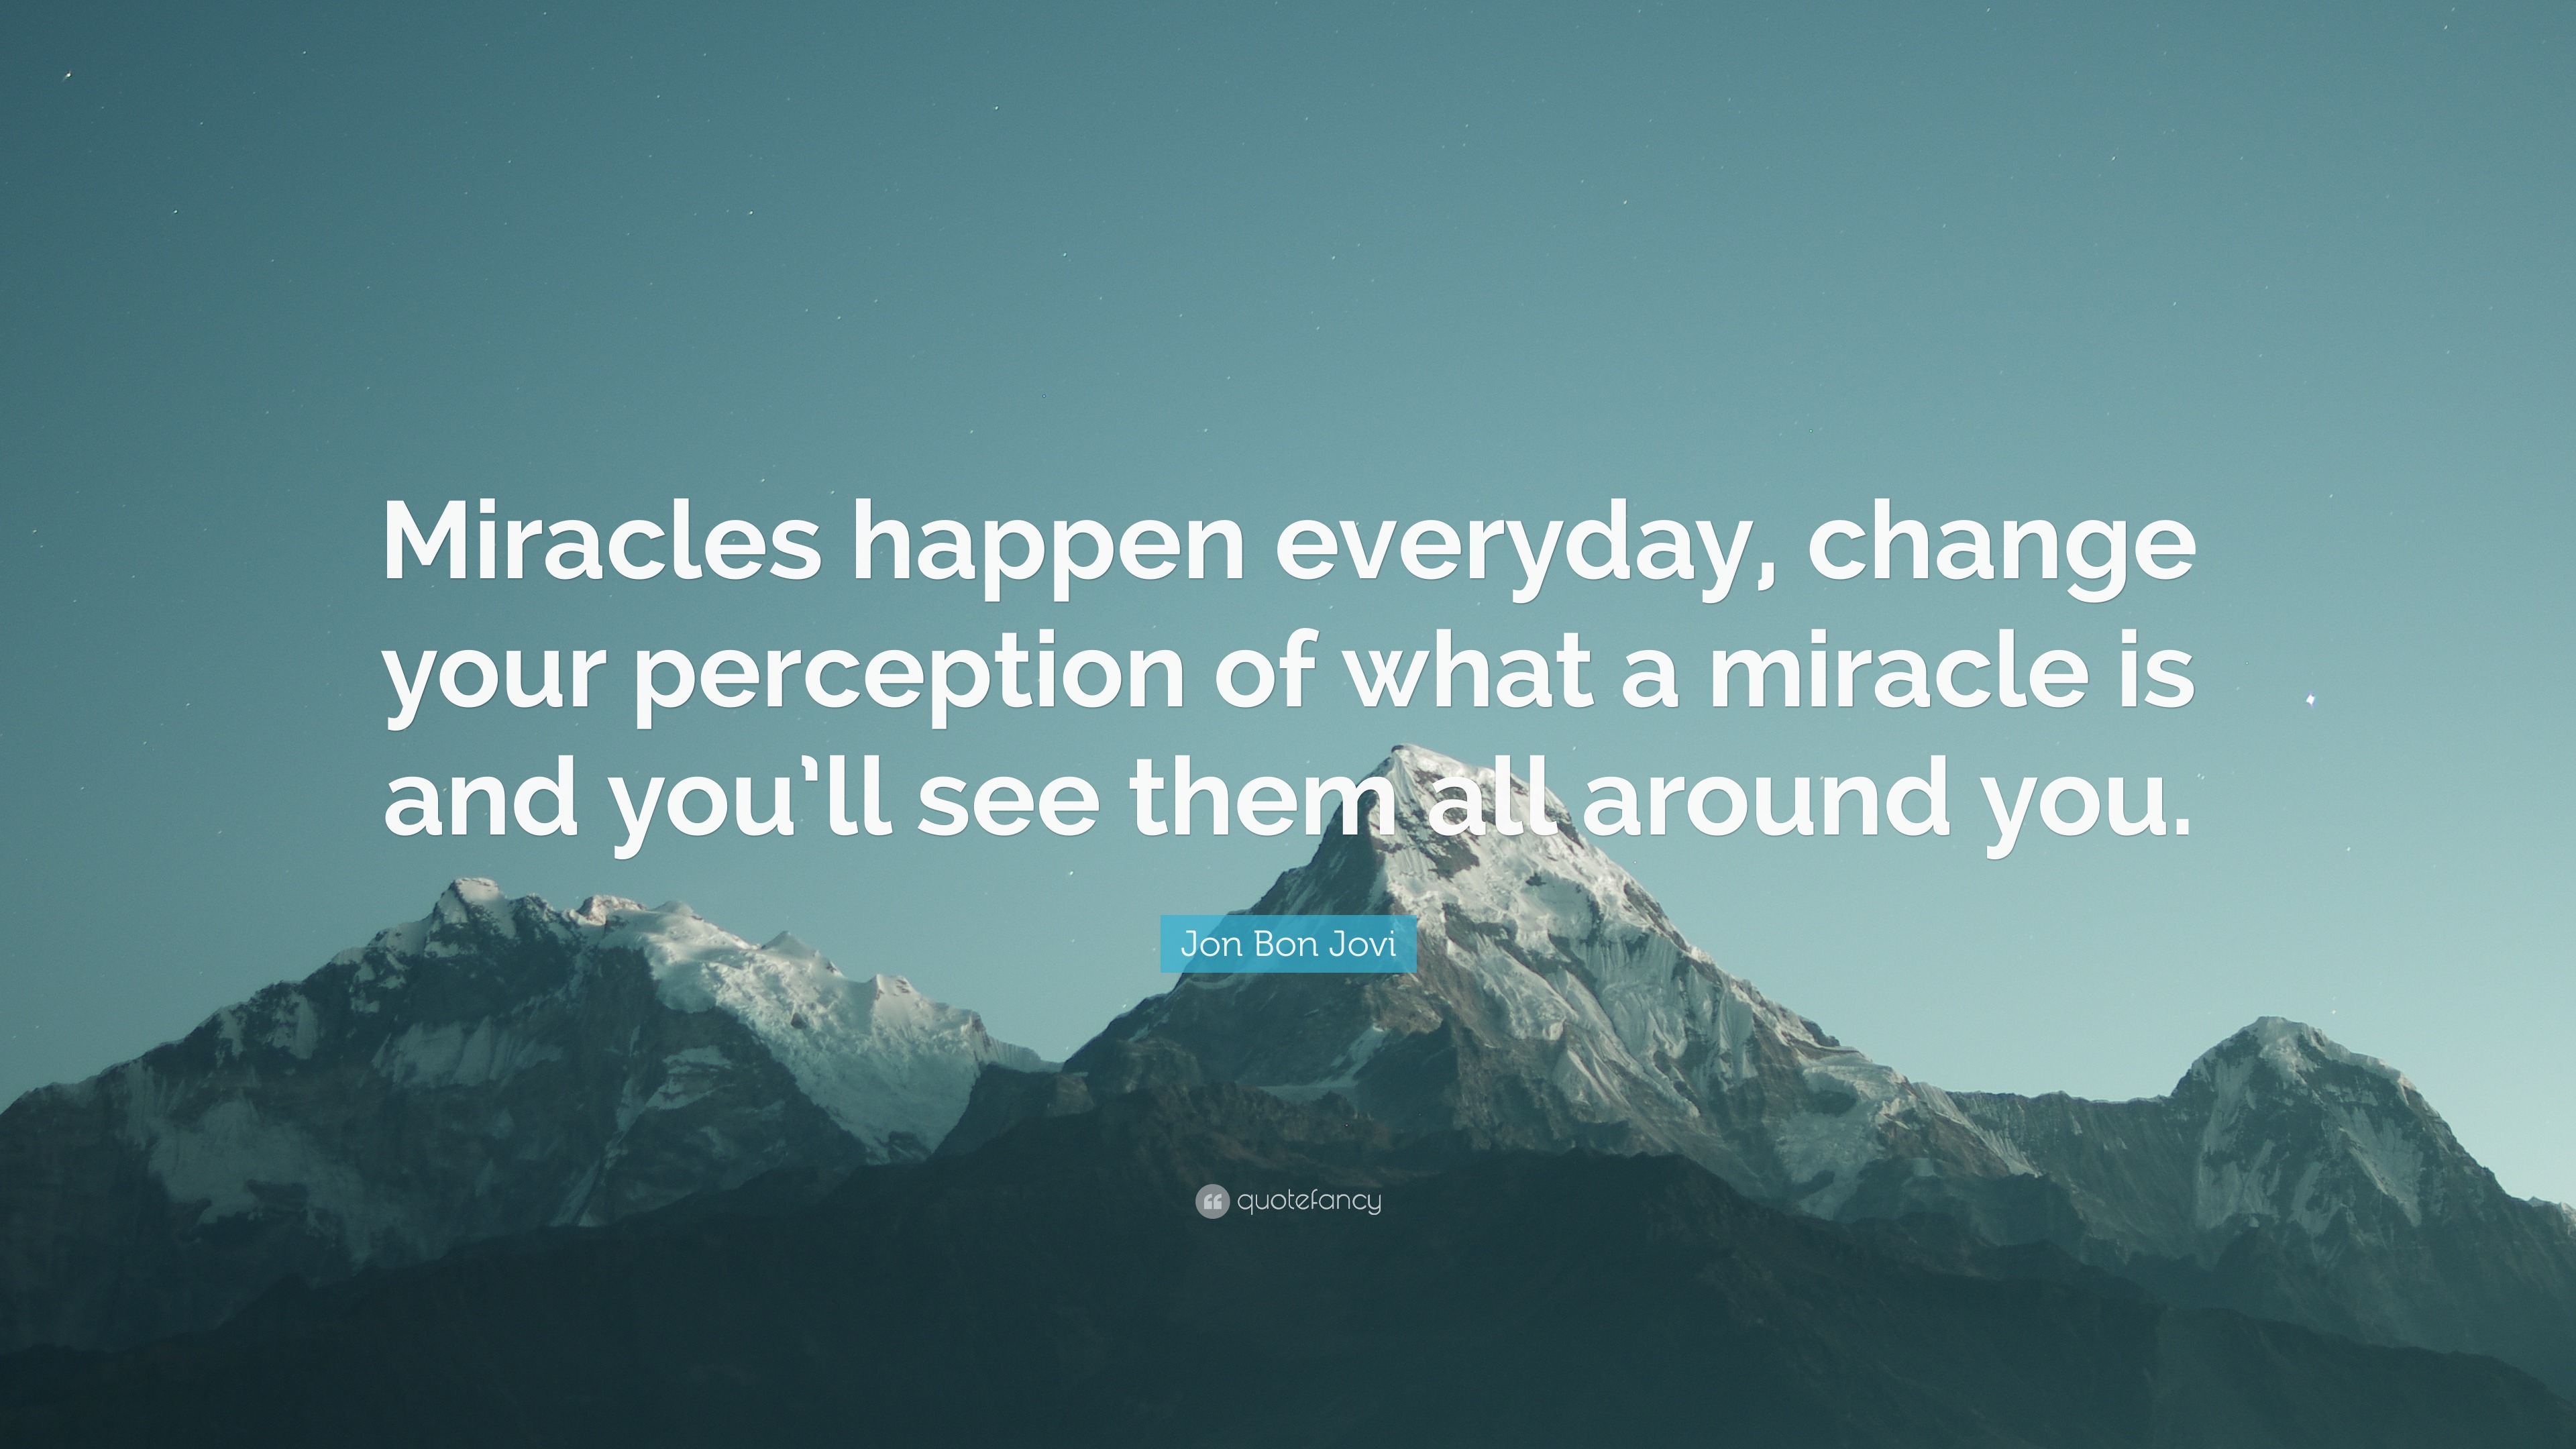 Jon Bon Jovi Quote: “Miracles happen everyday, change your perception of  what a miracle is and